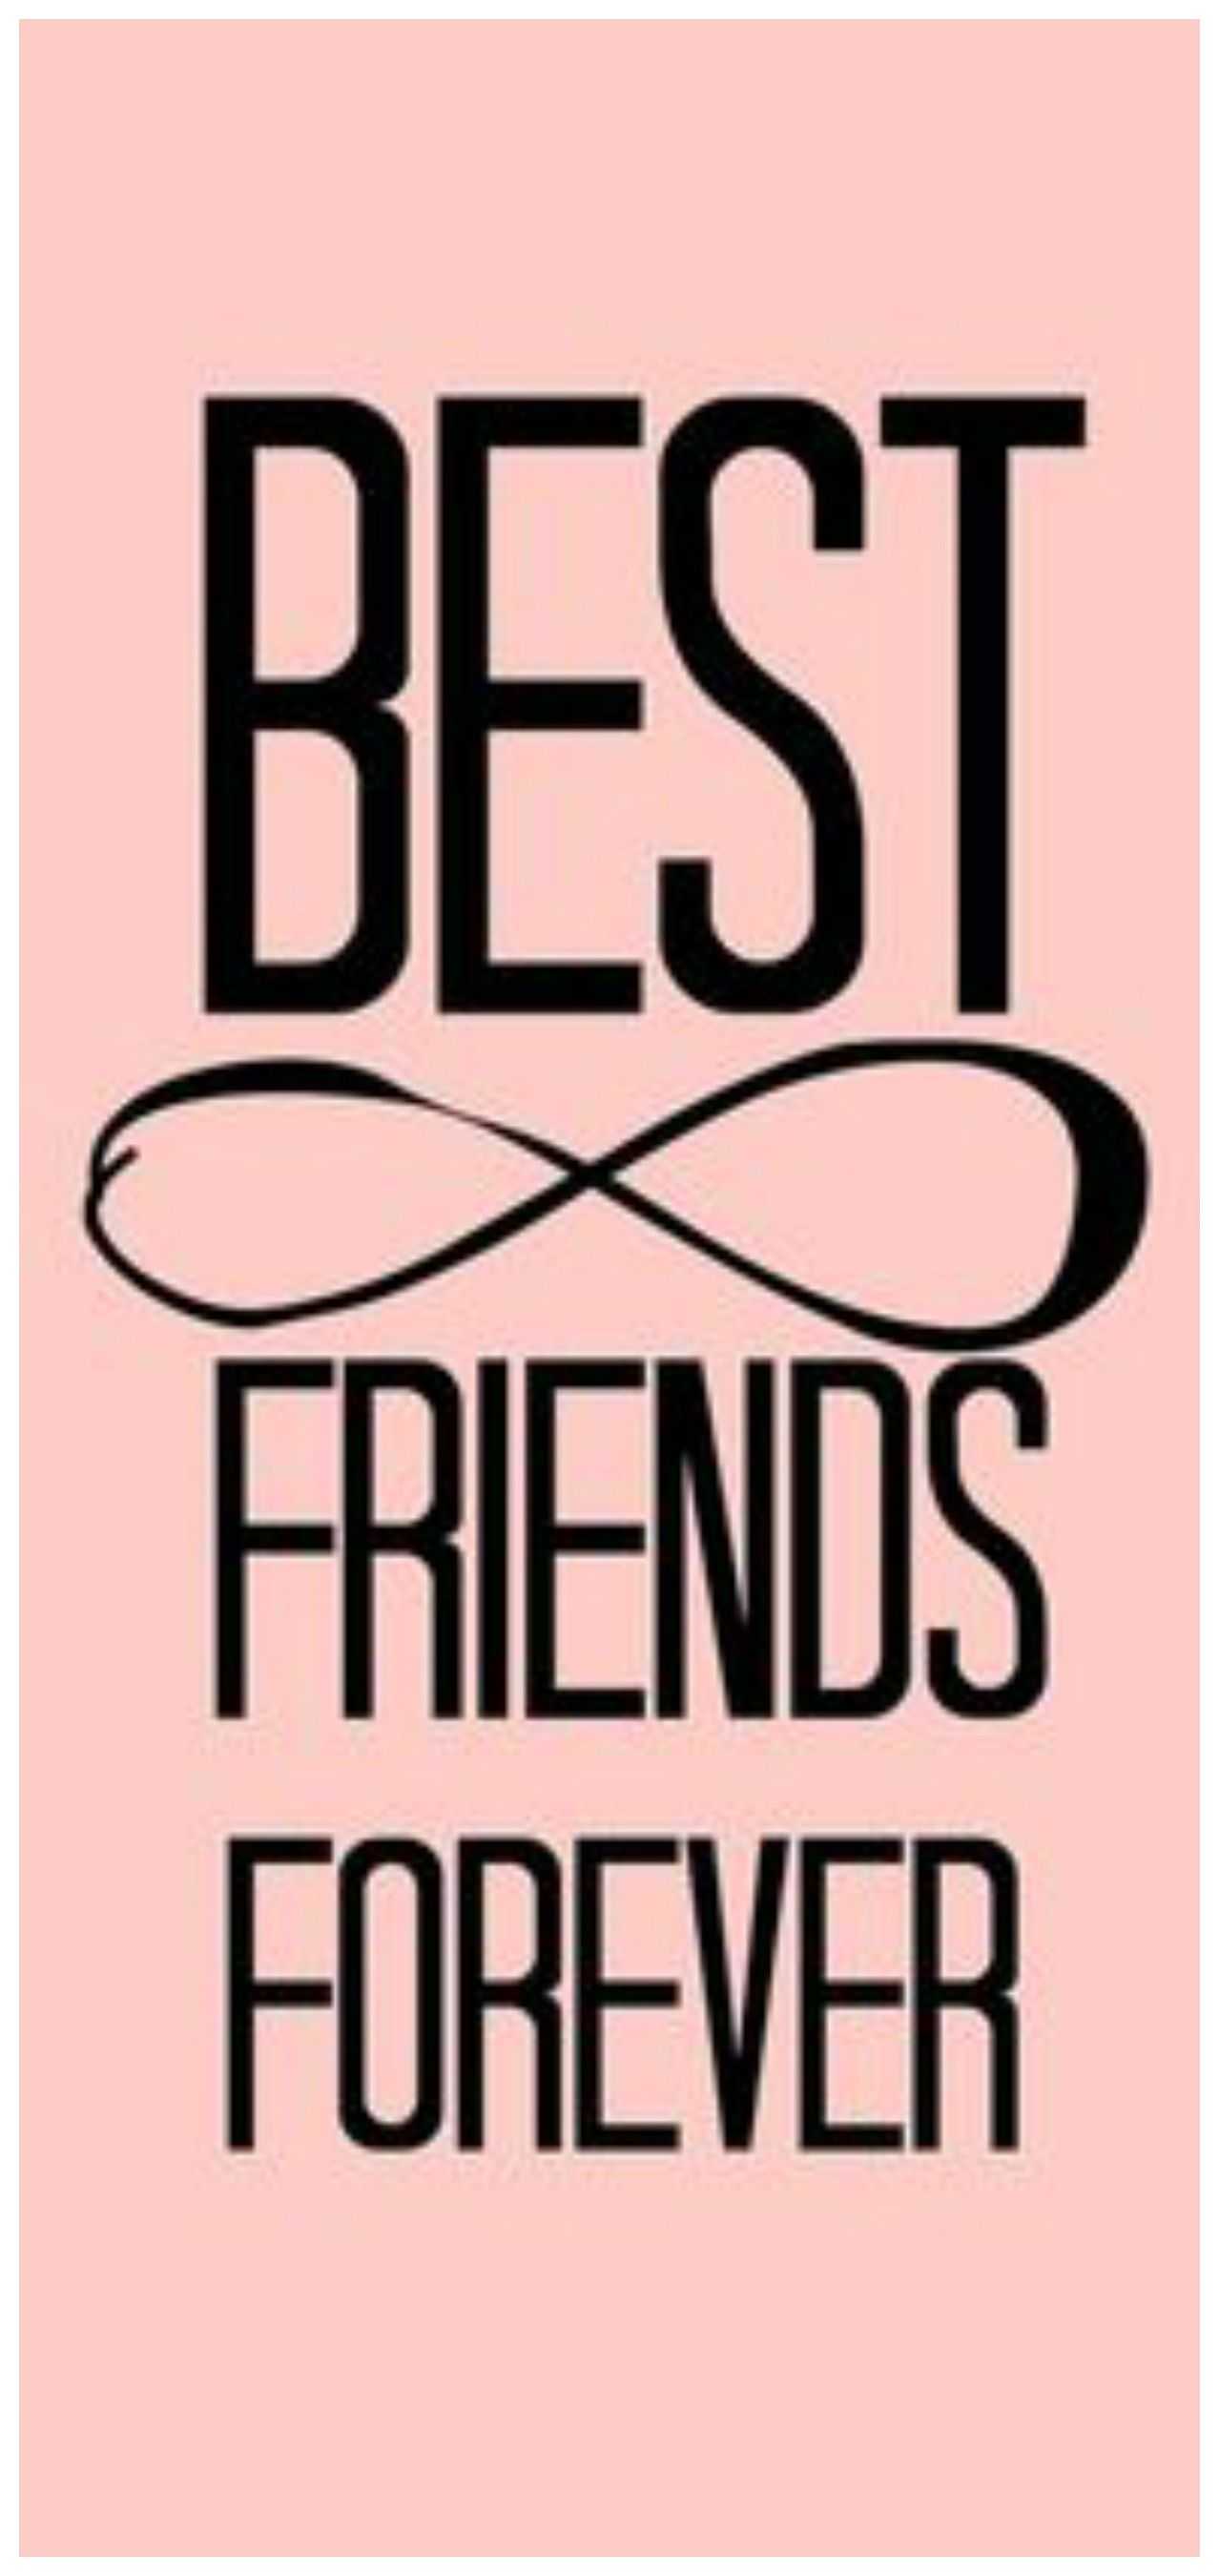 Cute Bff Wallpaper 71 images